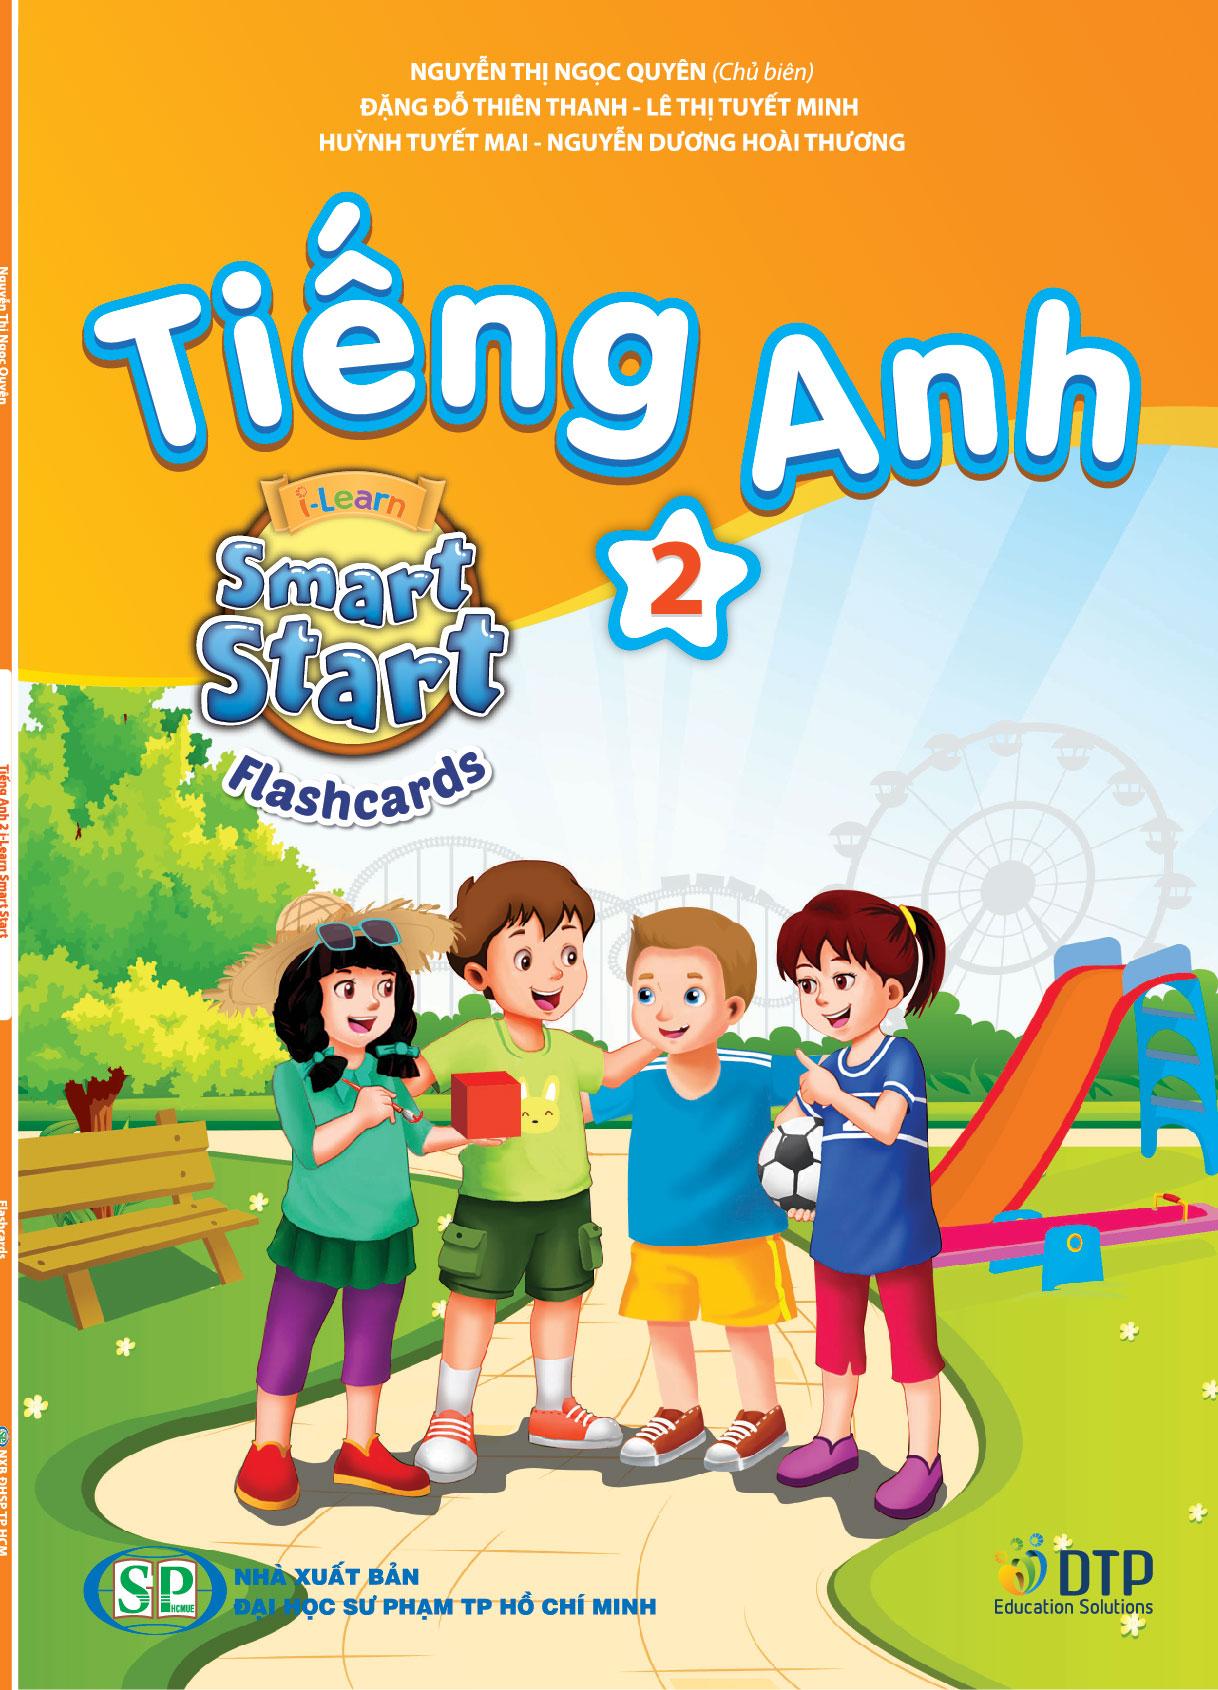 Tiếng Anh 2 i-Learn Smart Start – Flashcards